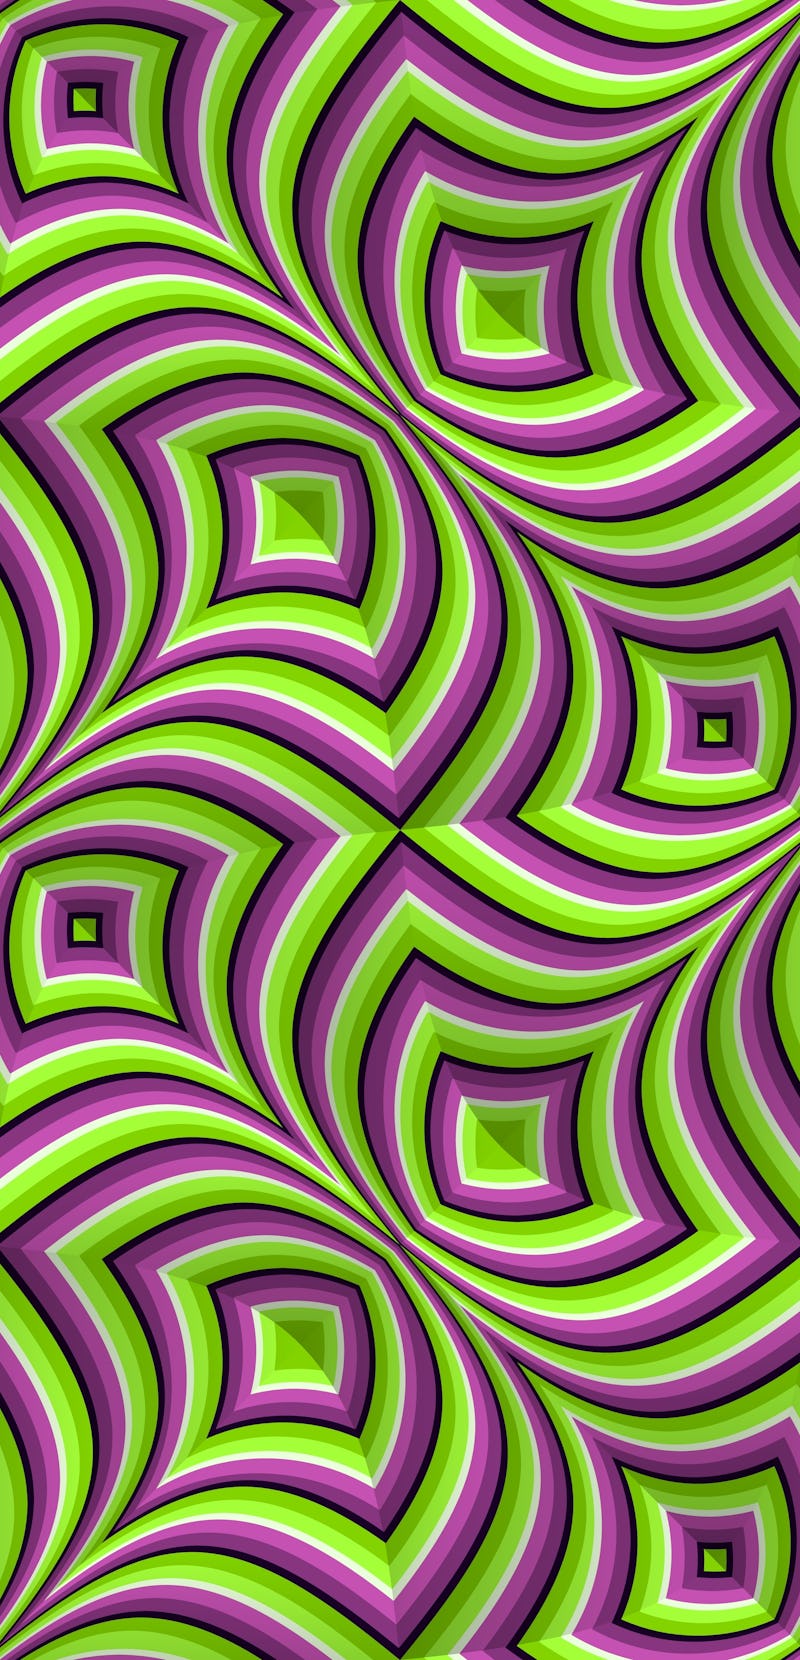 Optical illusion seamless pattern. Moving repeatable texture of green purple striped fancy shapes.